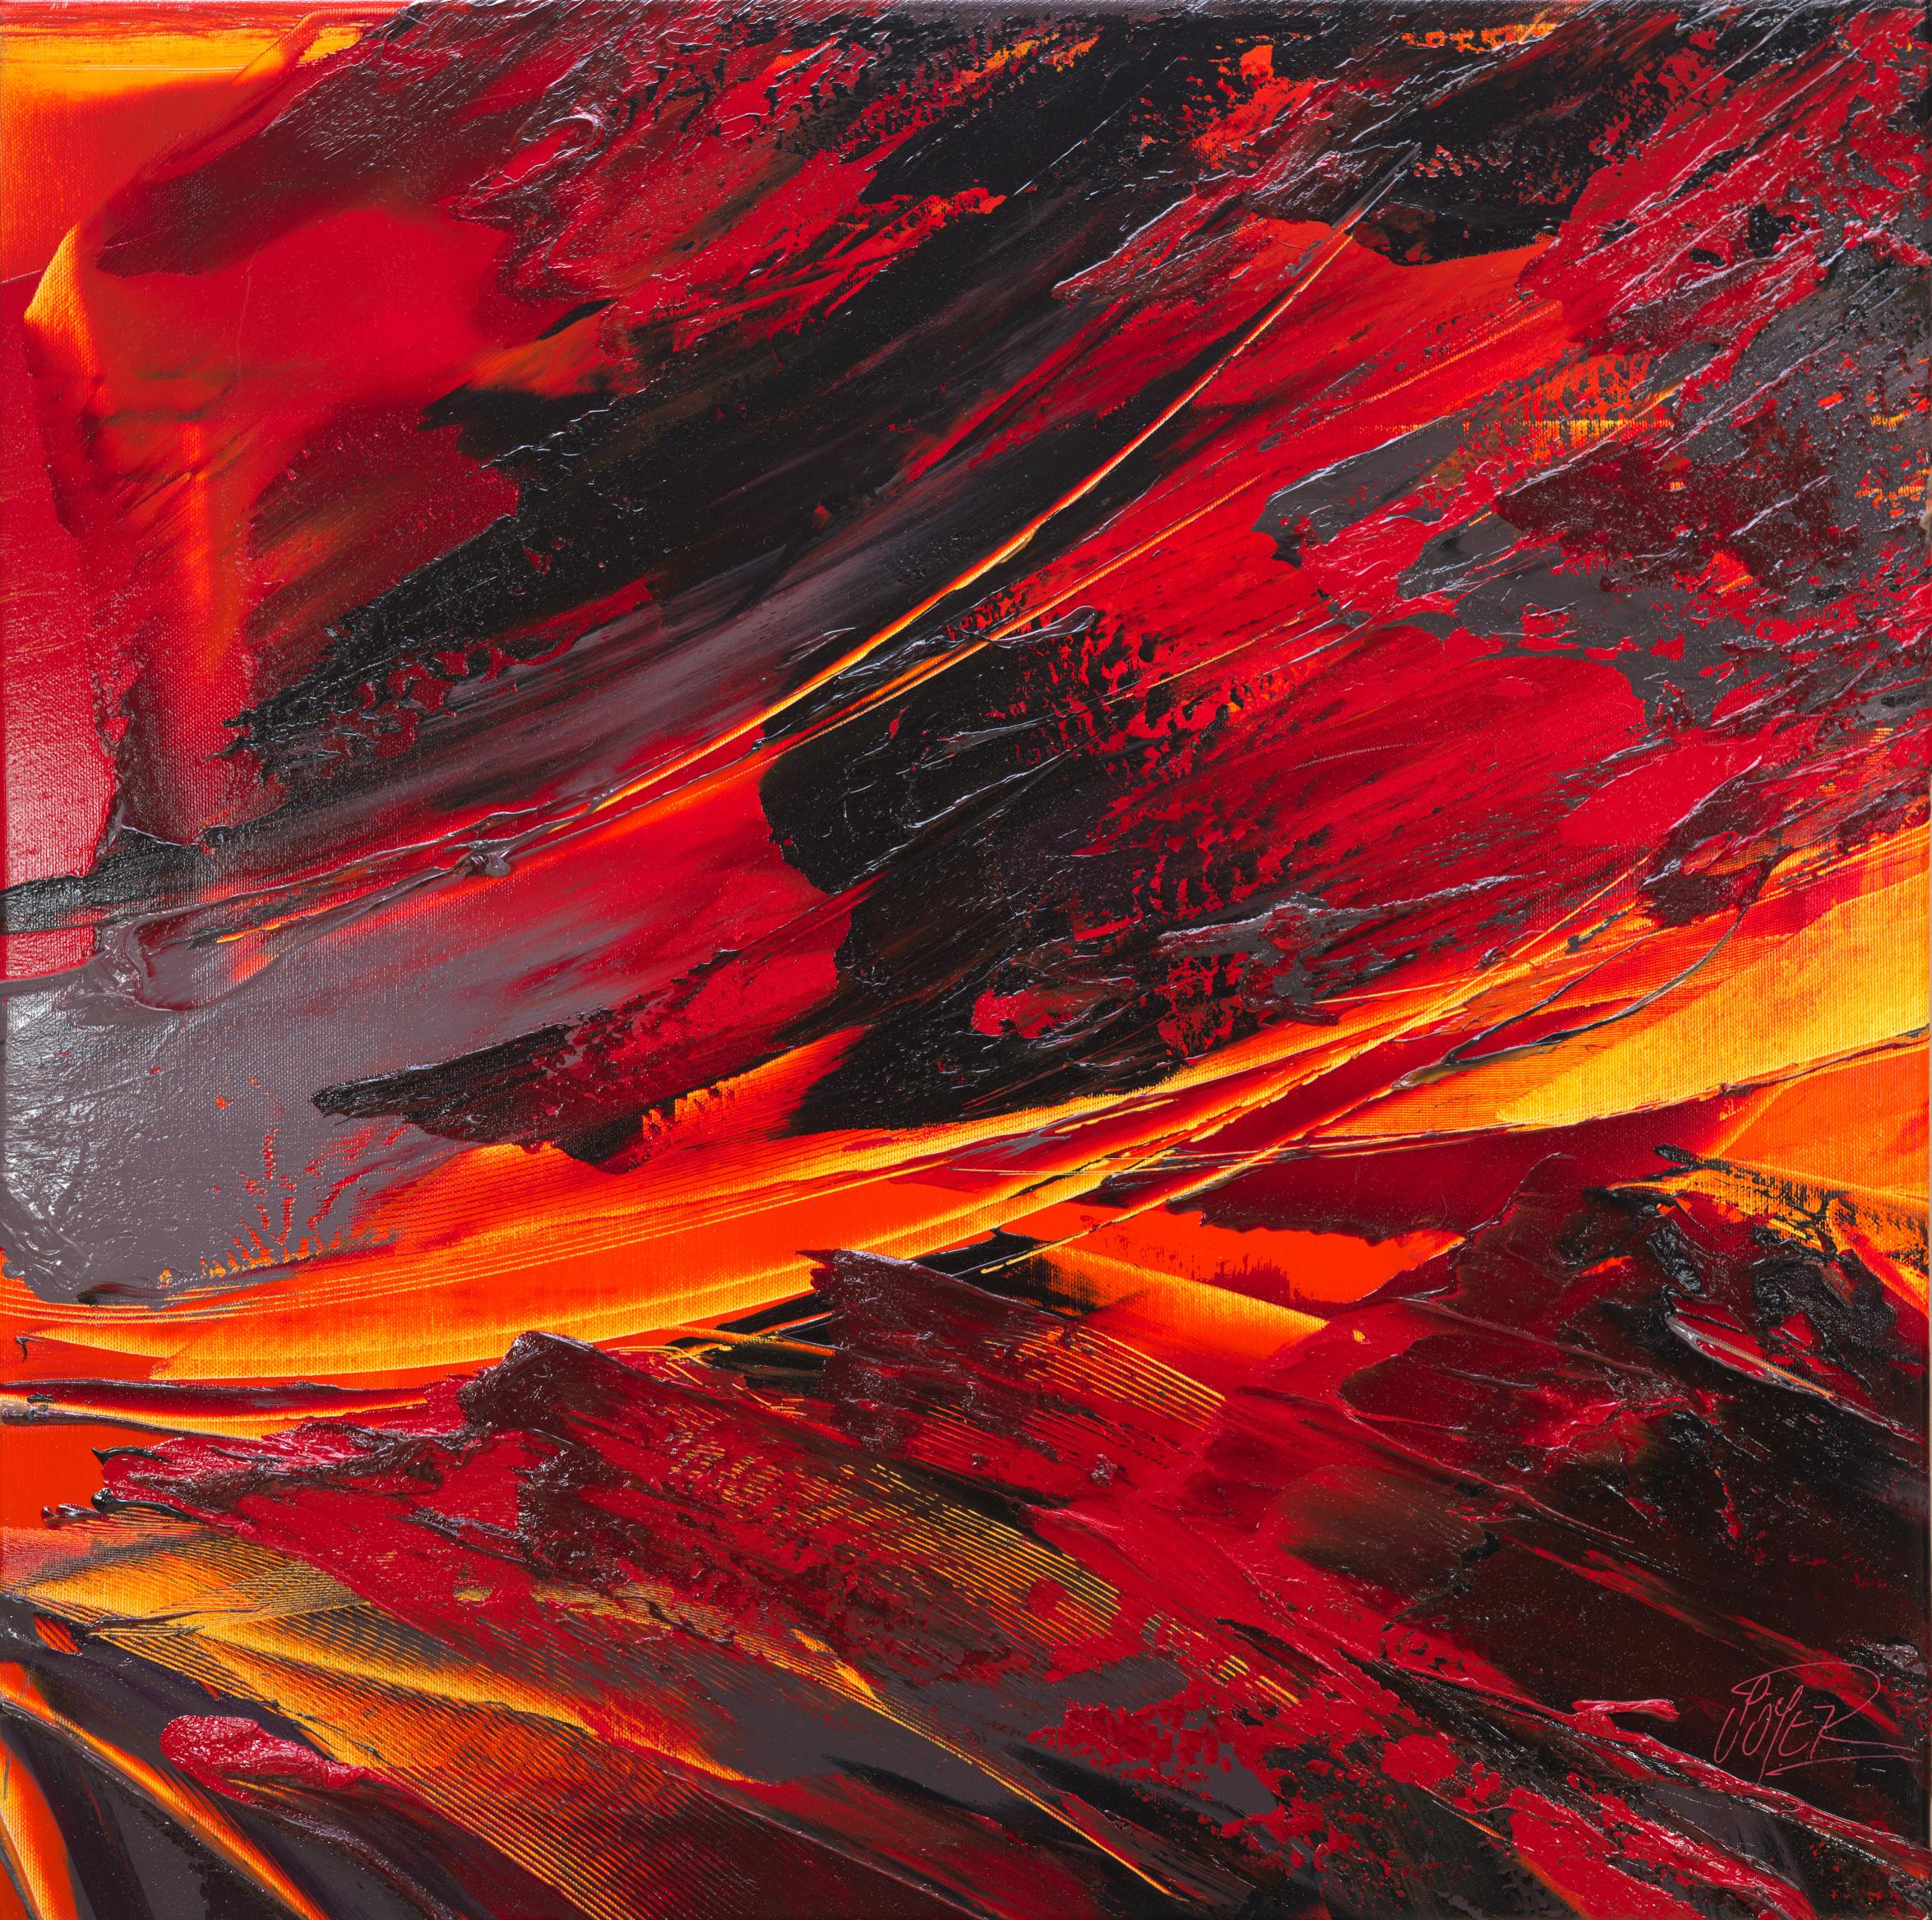 Jean Soyer Figurative Painting - Red Orange Black Volcanic Lava Magma Explosion Abstract Oil Painting, Untitled